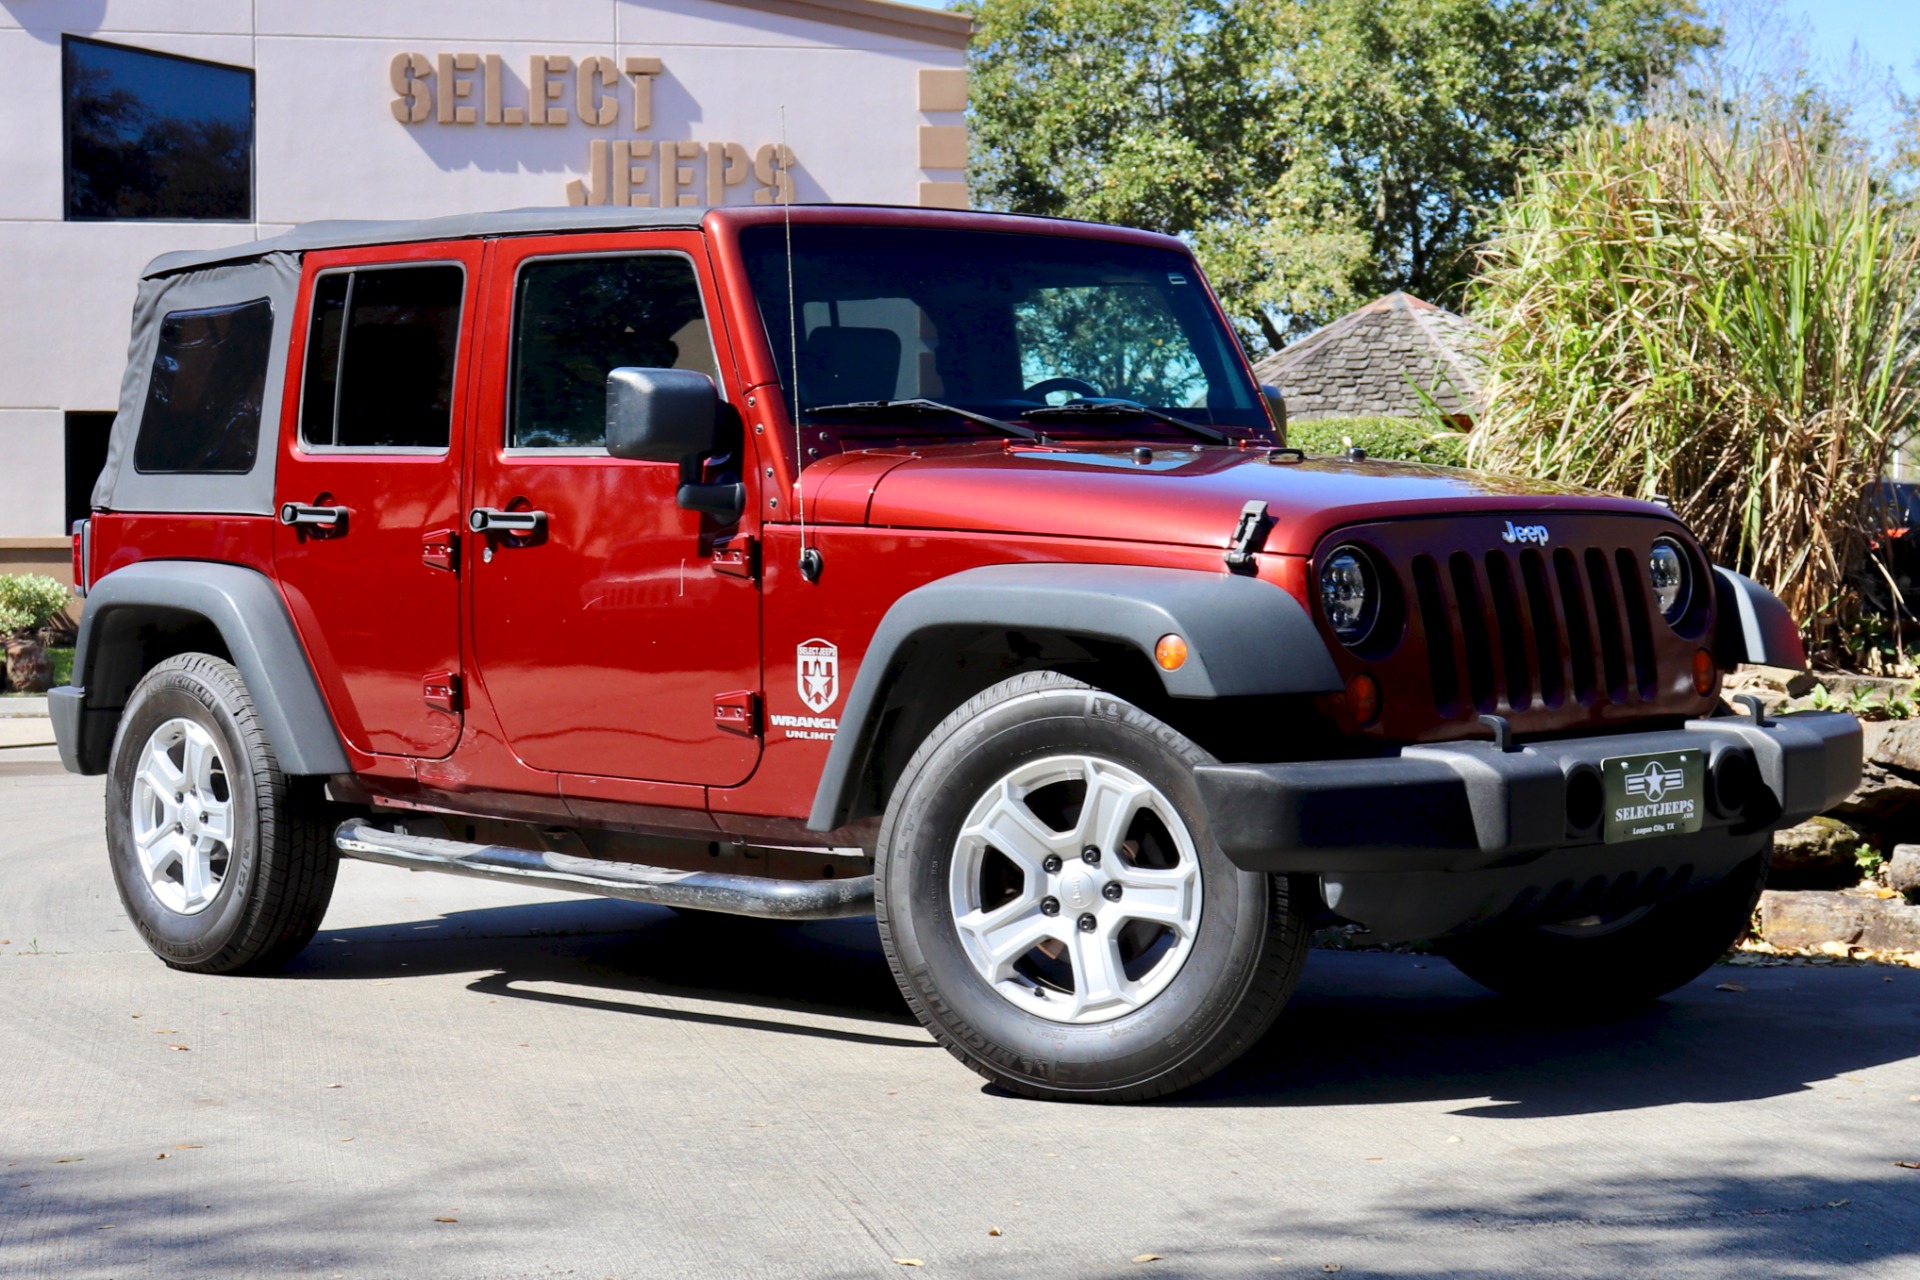 Used 2008 Jeep Wrangler Unlimited X For Sale ($13,995) | Select Jeeps Inc.  Stock #515296